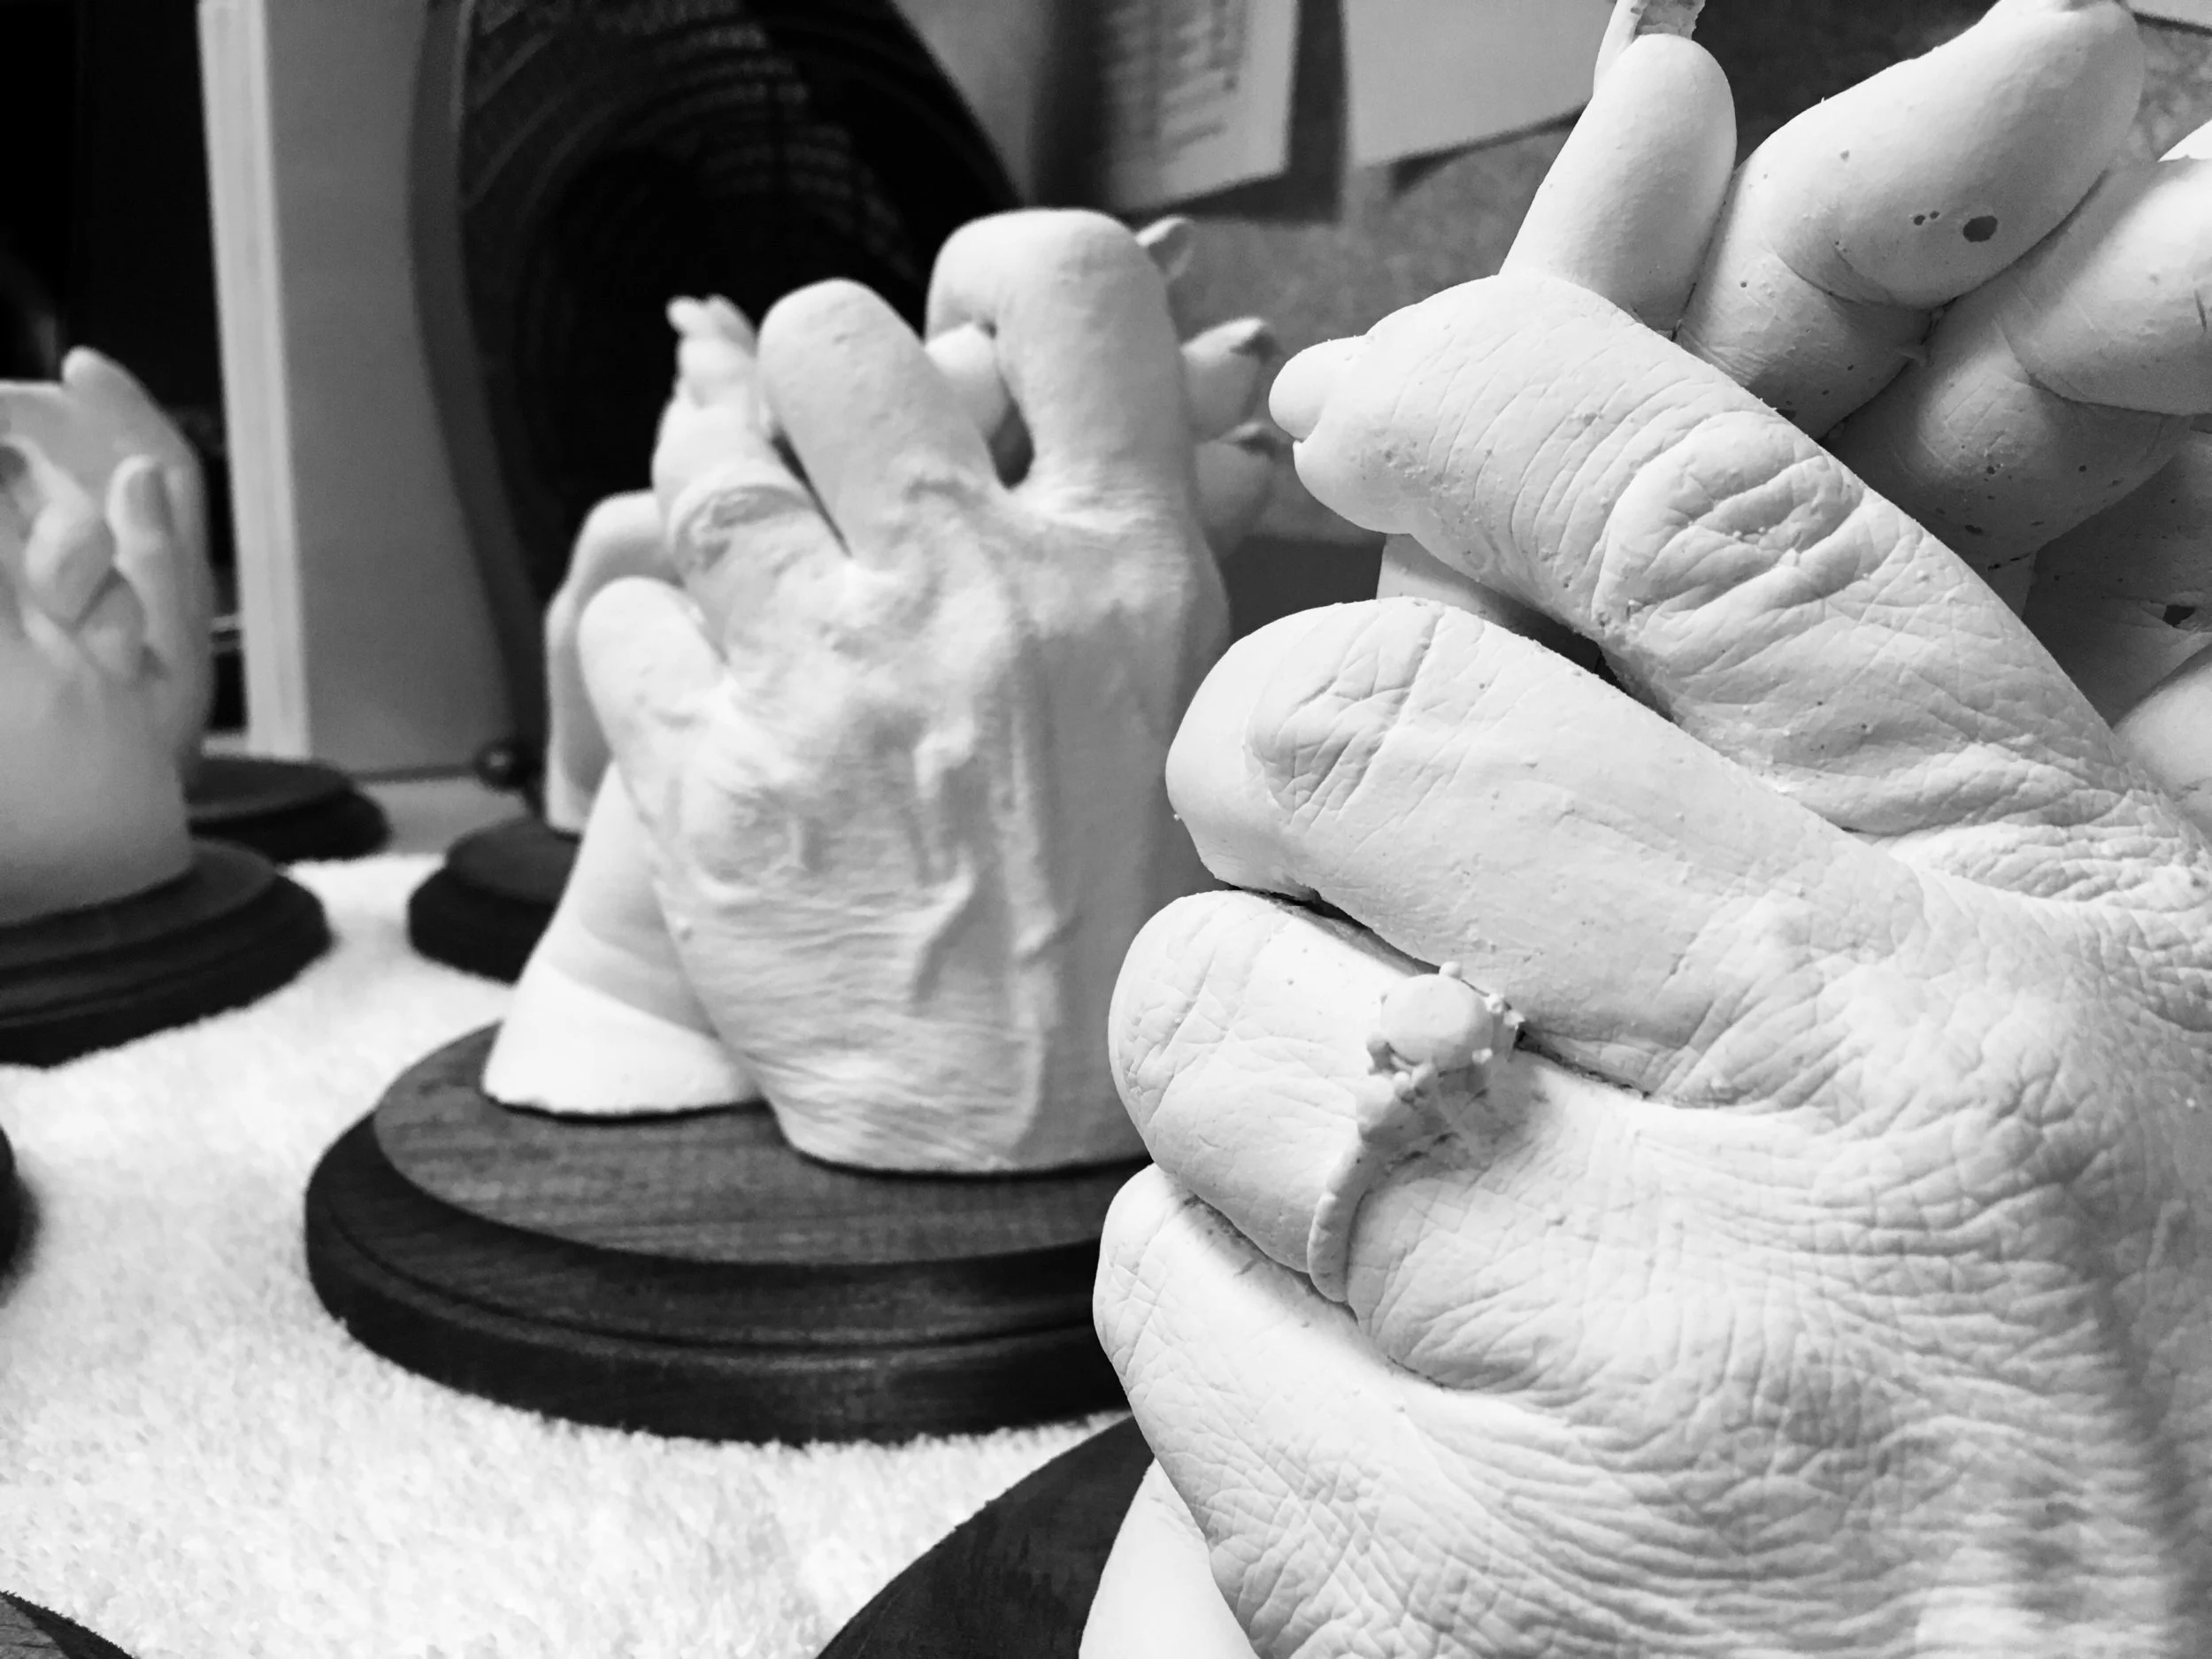 Hand castings of critically ill patients provide comfort to families